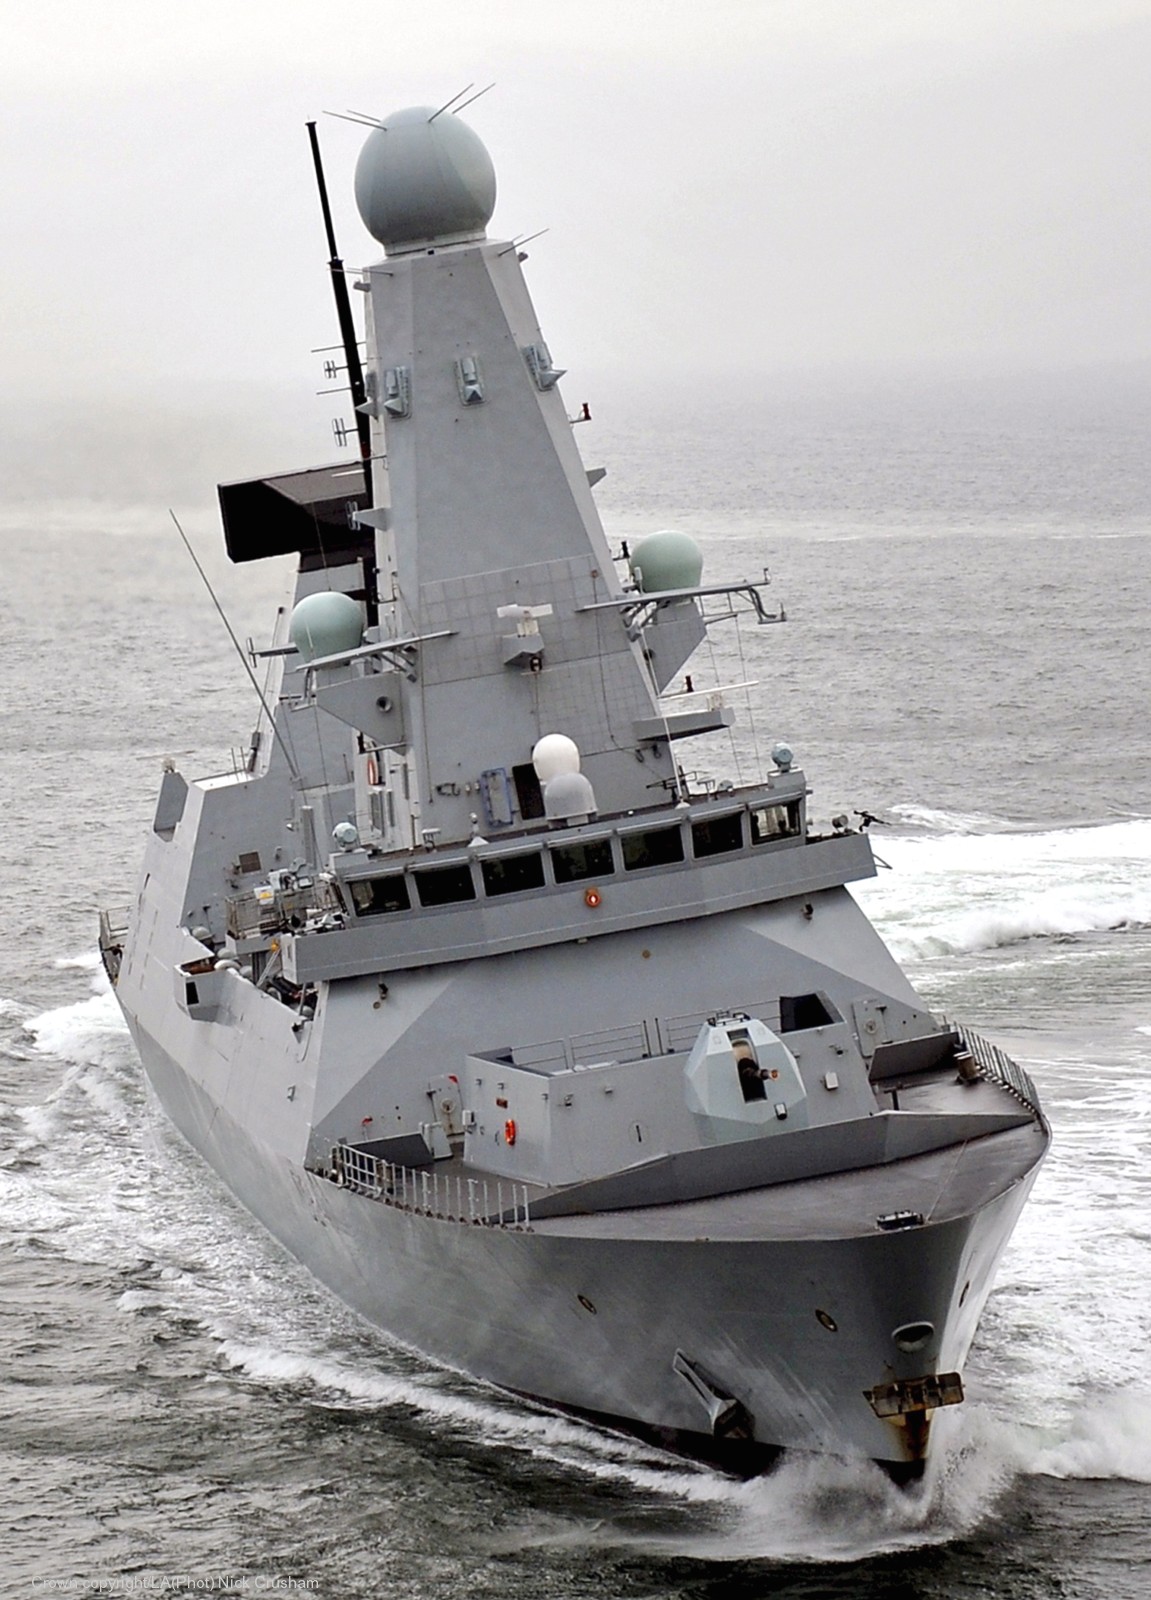 hms diamond d-34 type 45 daring class guided missile destroyer ddg royal navy sea viper paams 19